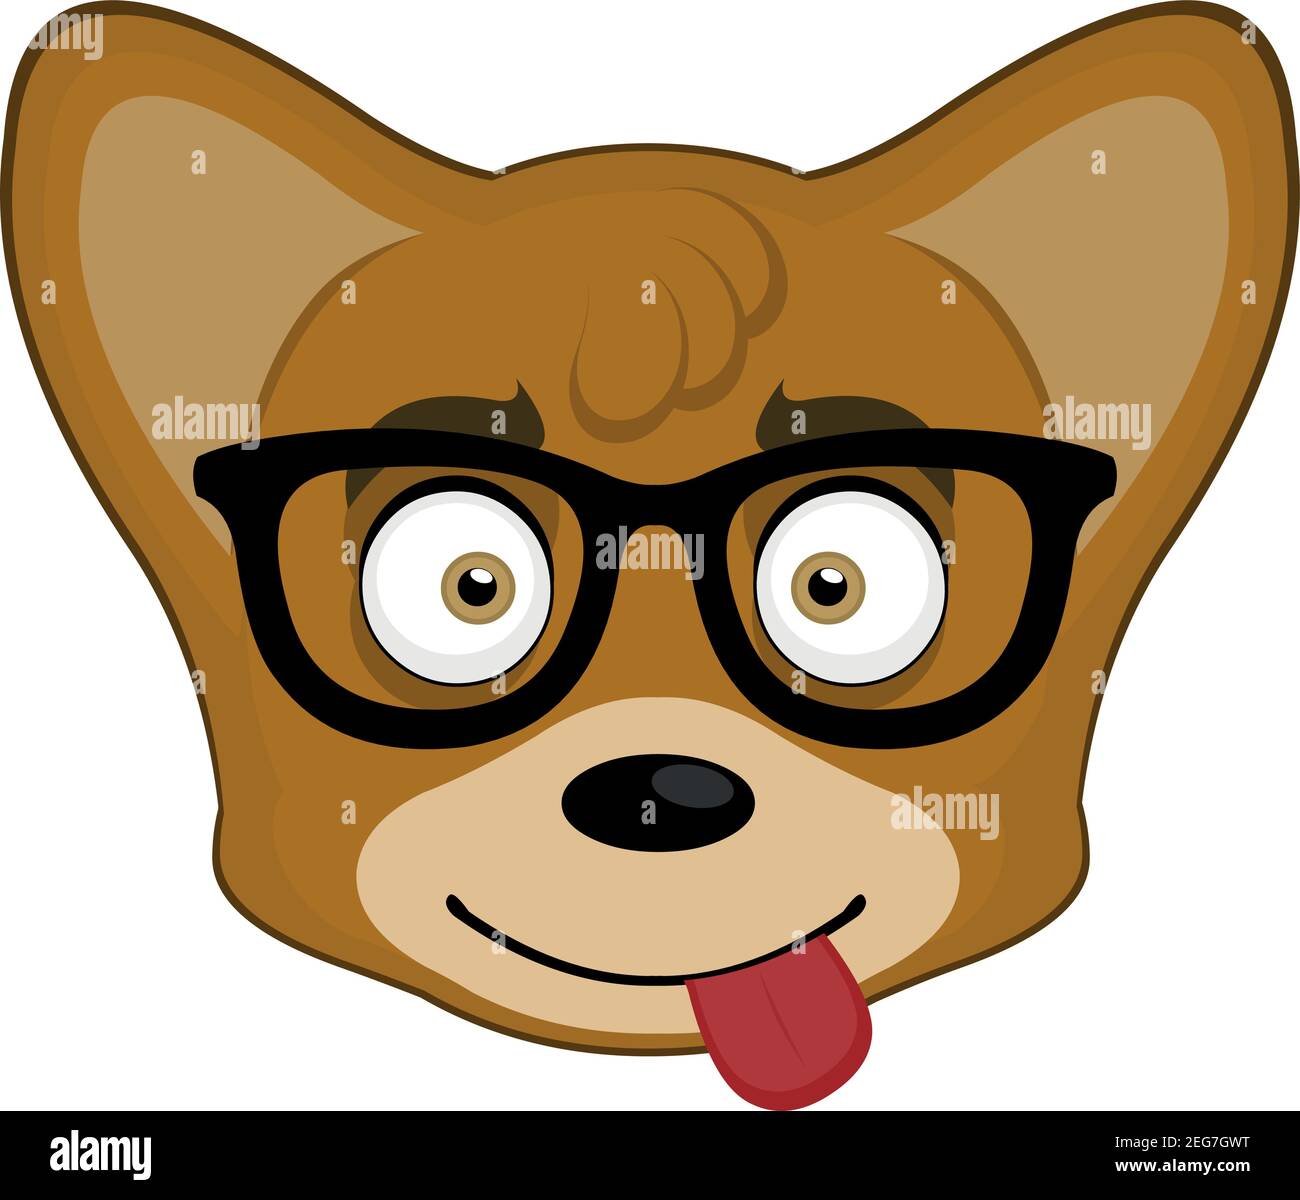 Vector illustration of the face of a cartoon fox with glasses Stock Vector